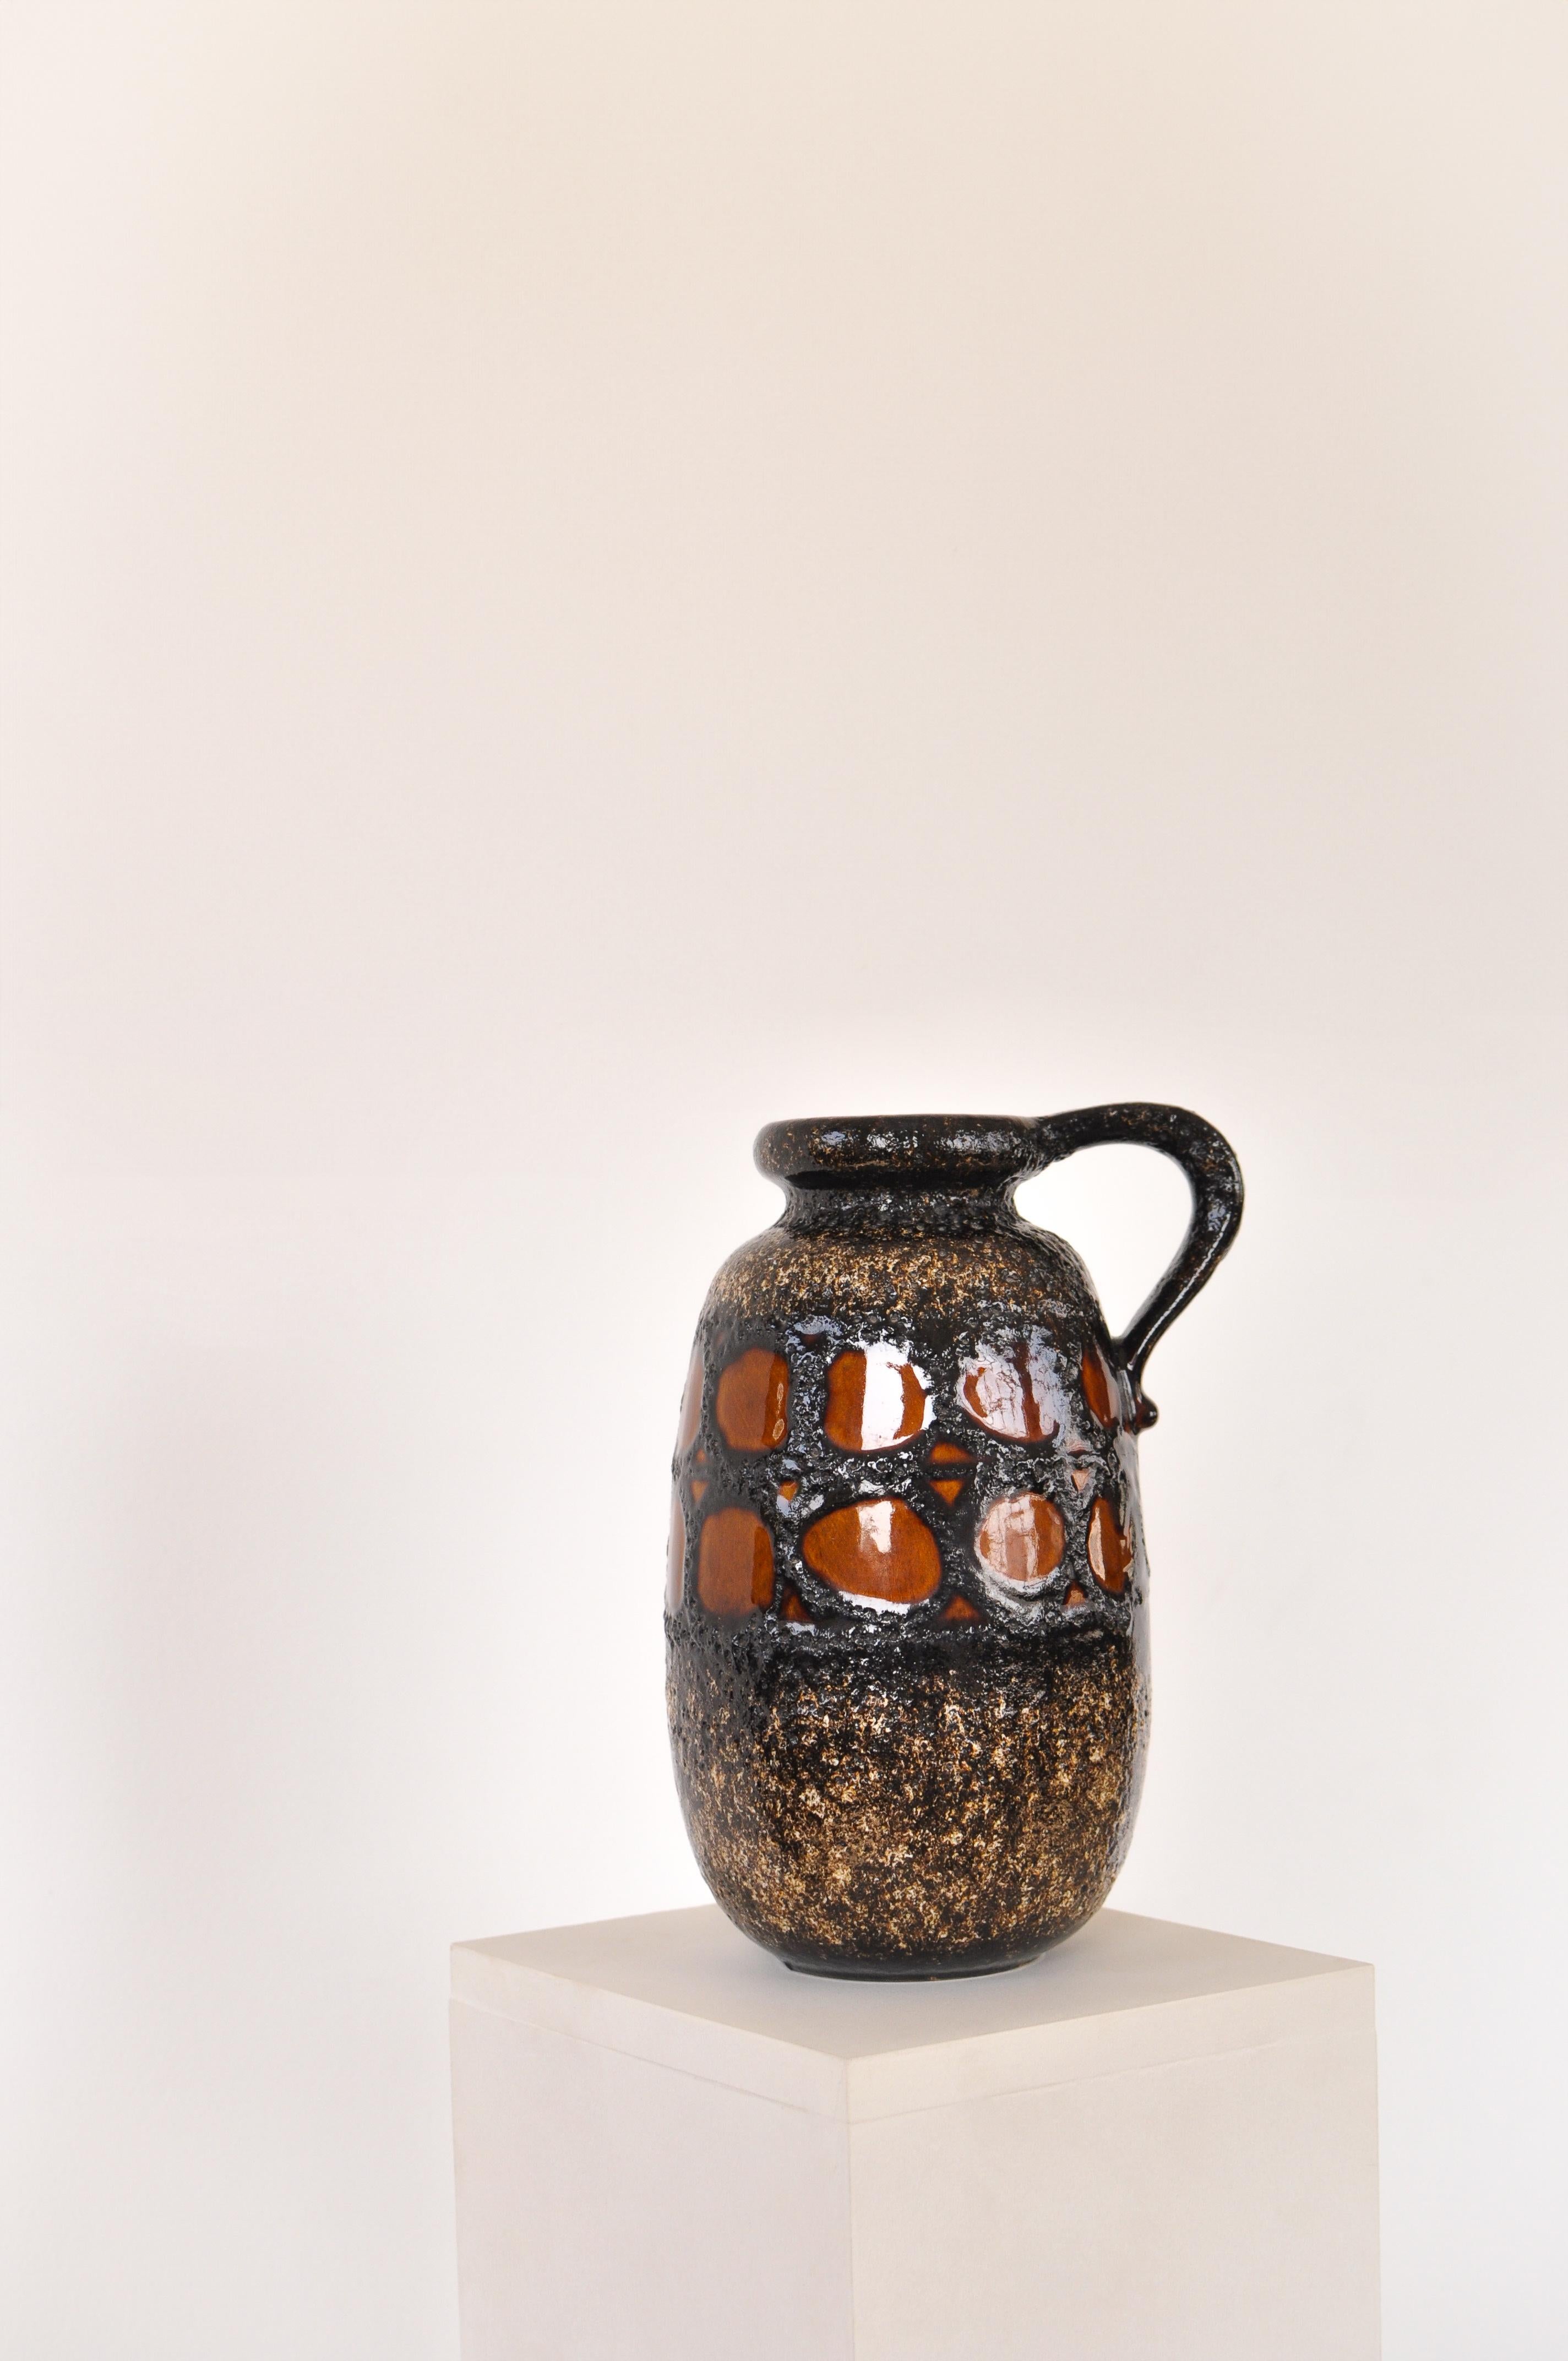 Glazed fat lava ceramic vase produced in East Germany number 484-27. Brown background textured details in black and orange. Piece with marking on the bottom.